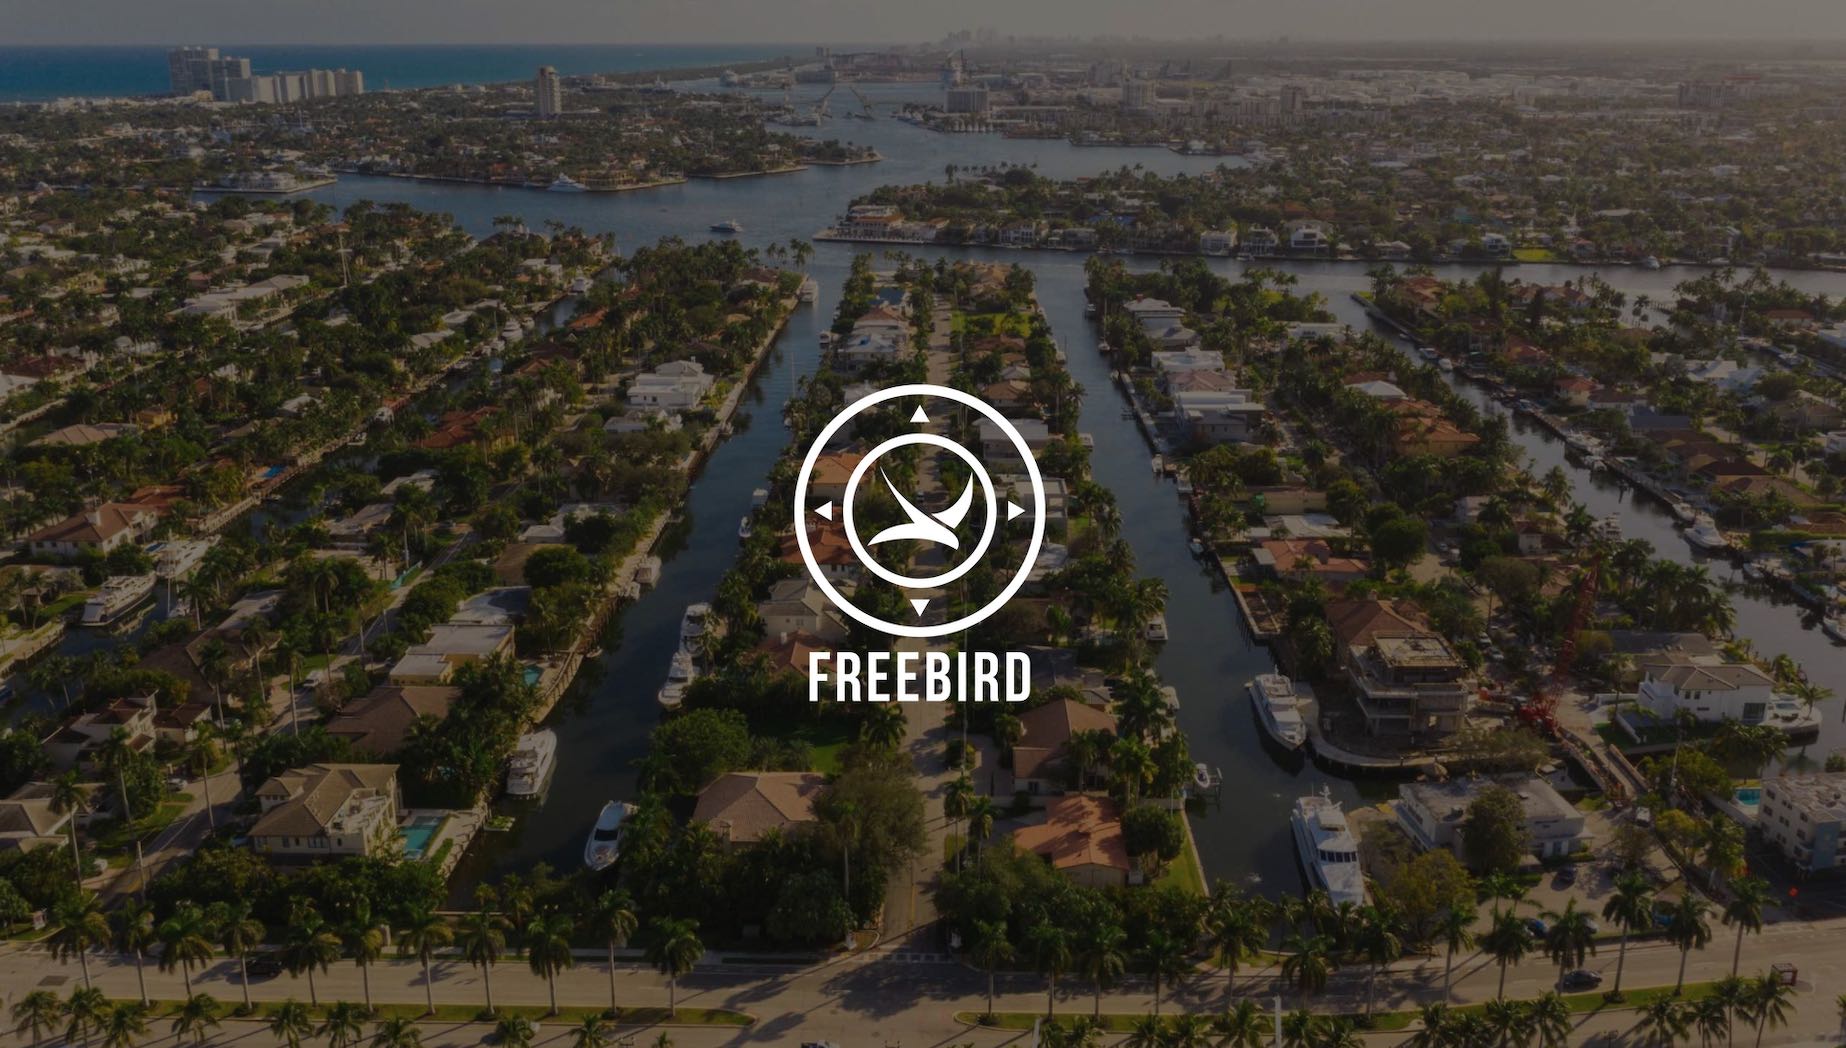 IU C&I Studios Page White Freebird logo website development on dimmed background aerial view of houses with canals with boats anchored